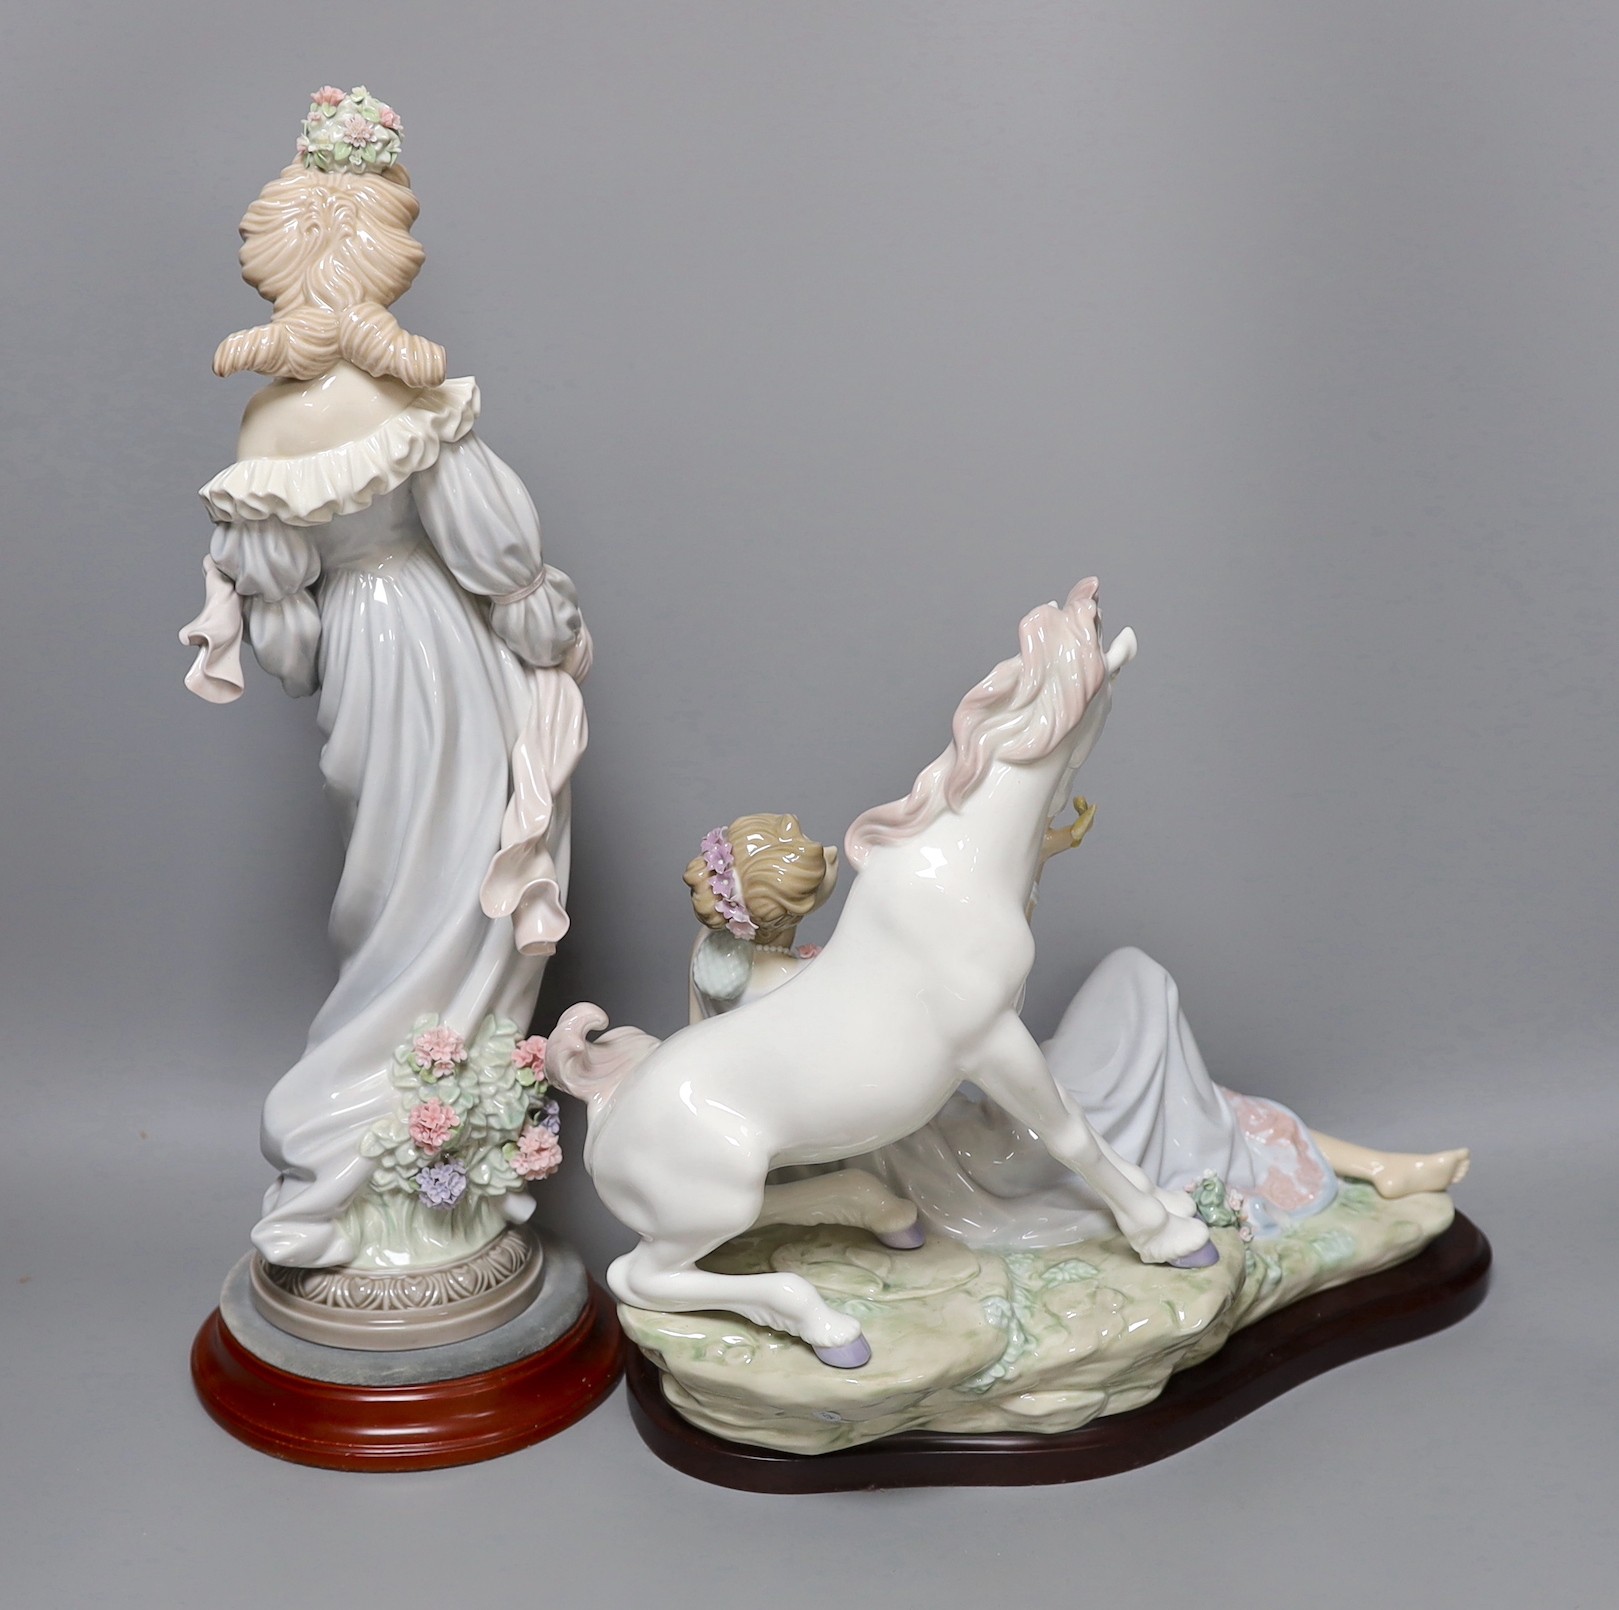 A Lladro figure of a lady and a similar figure group of a lady and a unicorn. Both on hardwood stands, tallest 41cm excluding stand